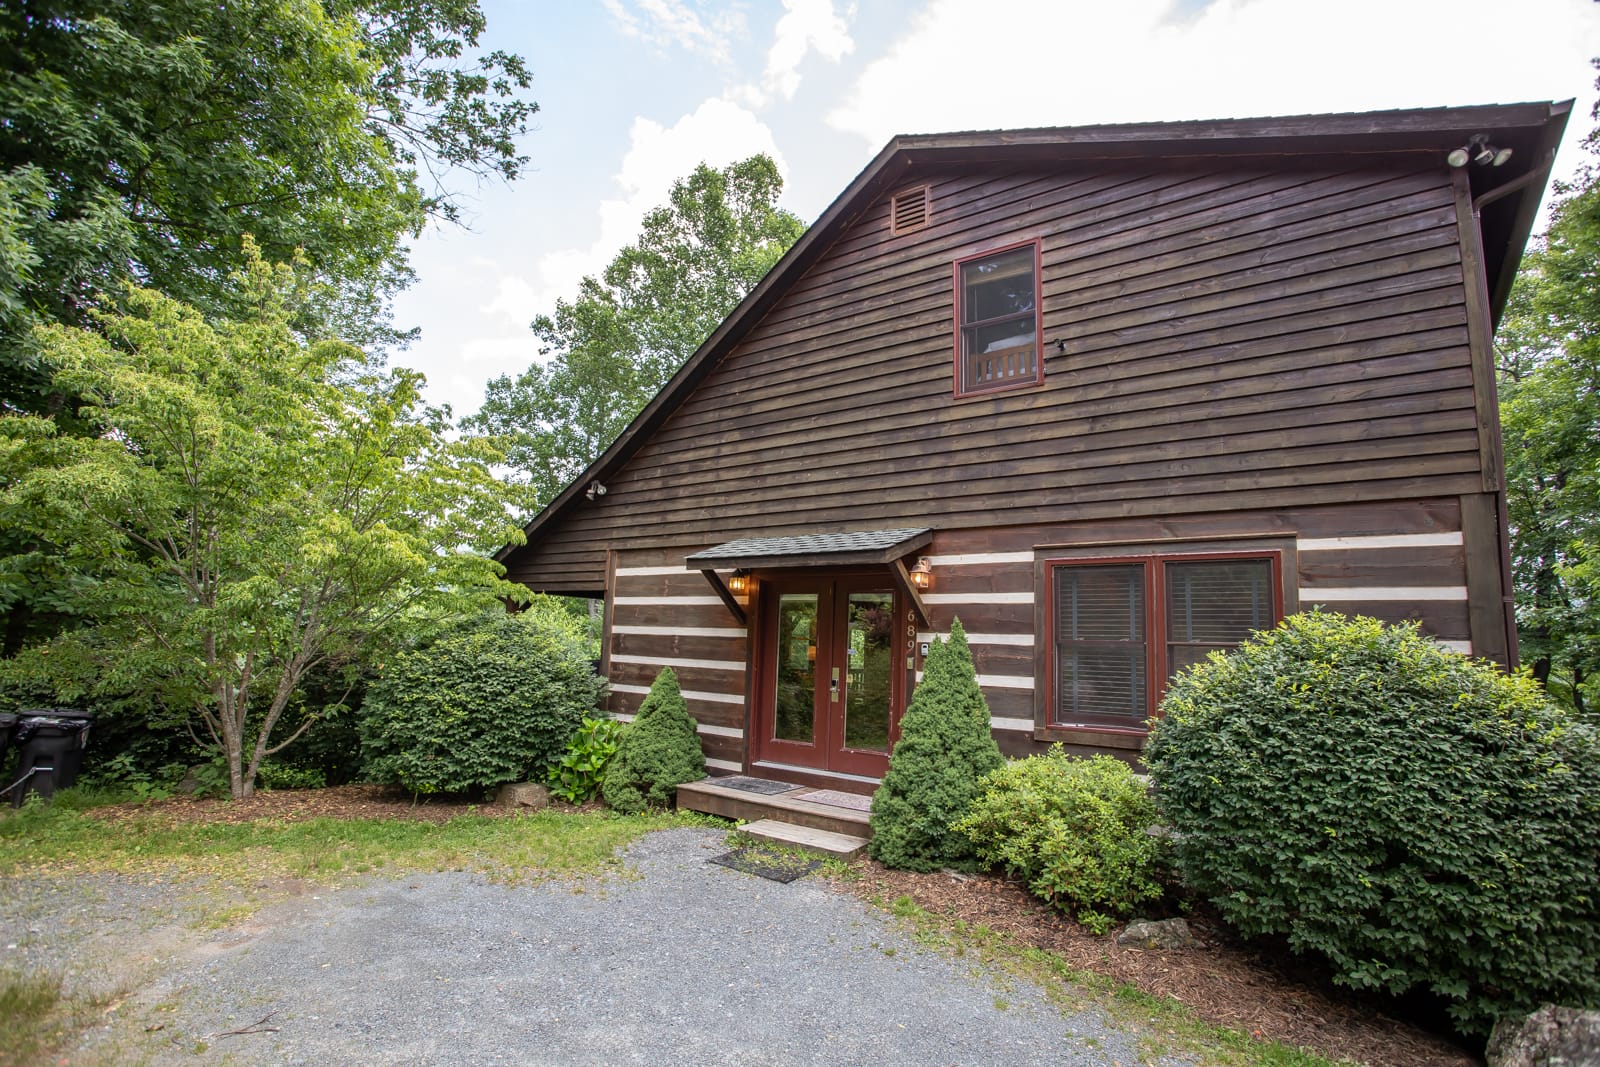 Willow Valley View Boone NC Pet Friendly 4 Bedroom Vacation Cabin Rental Mountain Views (135365